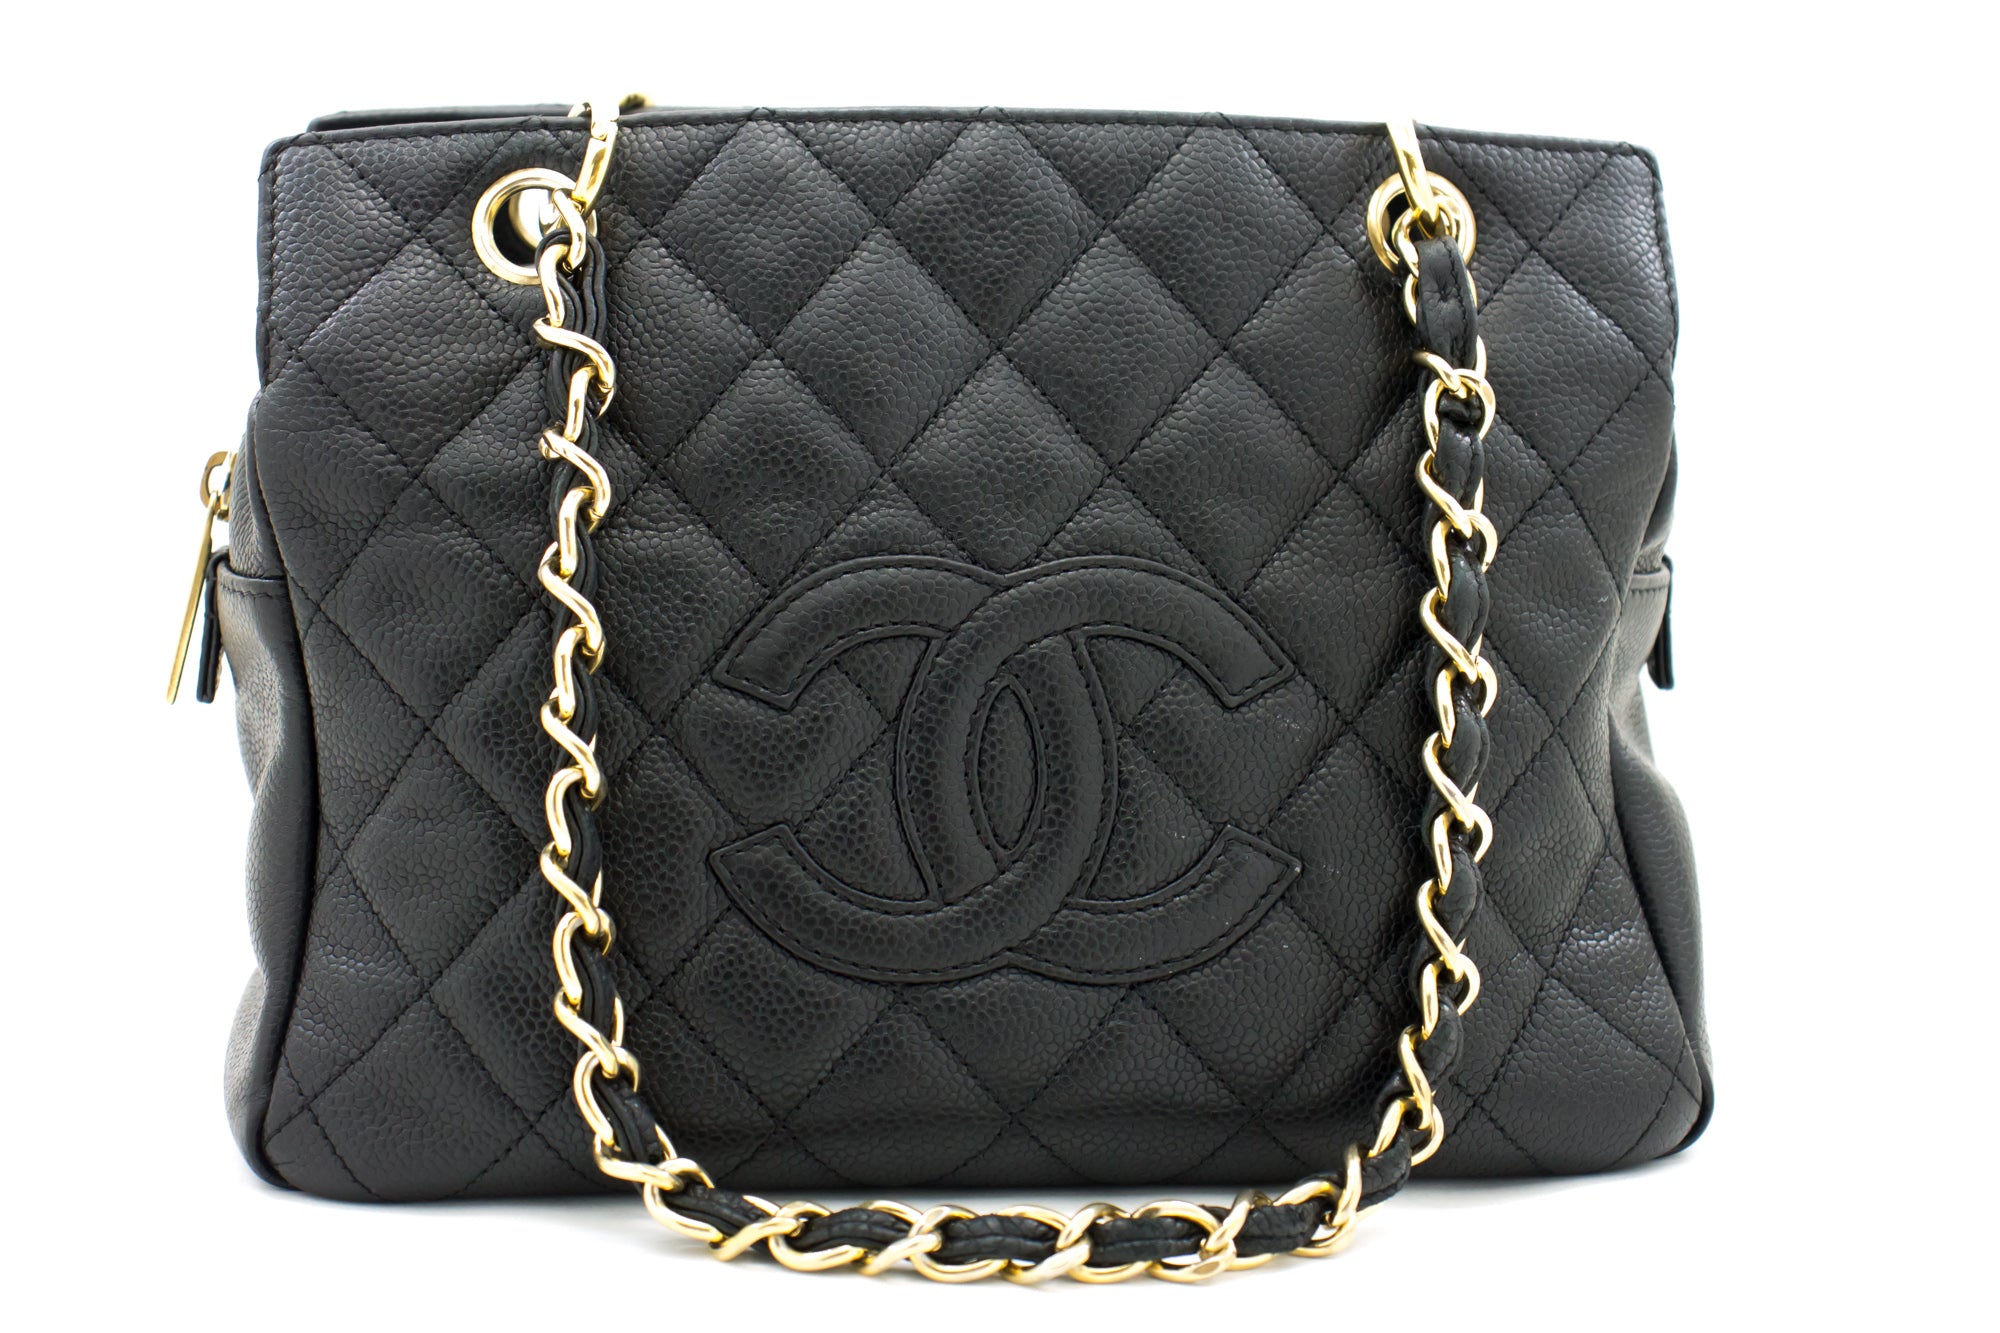 CHANEL Caviar Chain Shoulder Bag Shopping Tote Black Quilted i56 – hannari- shop